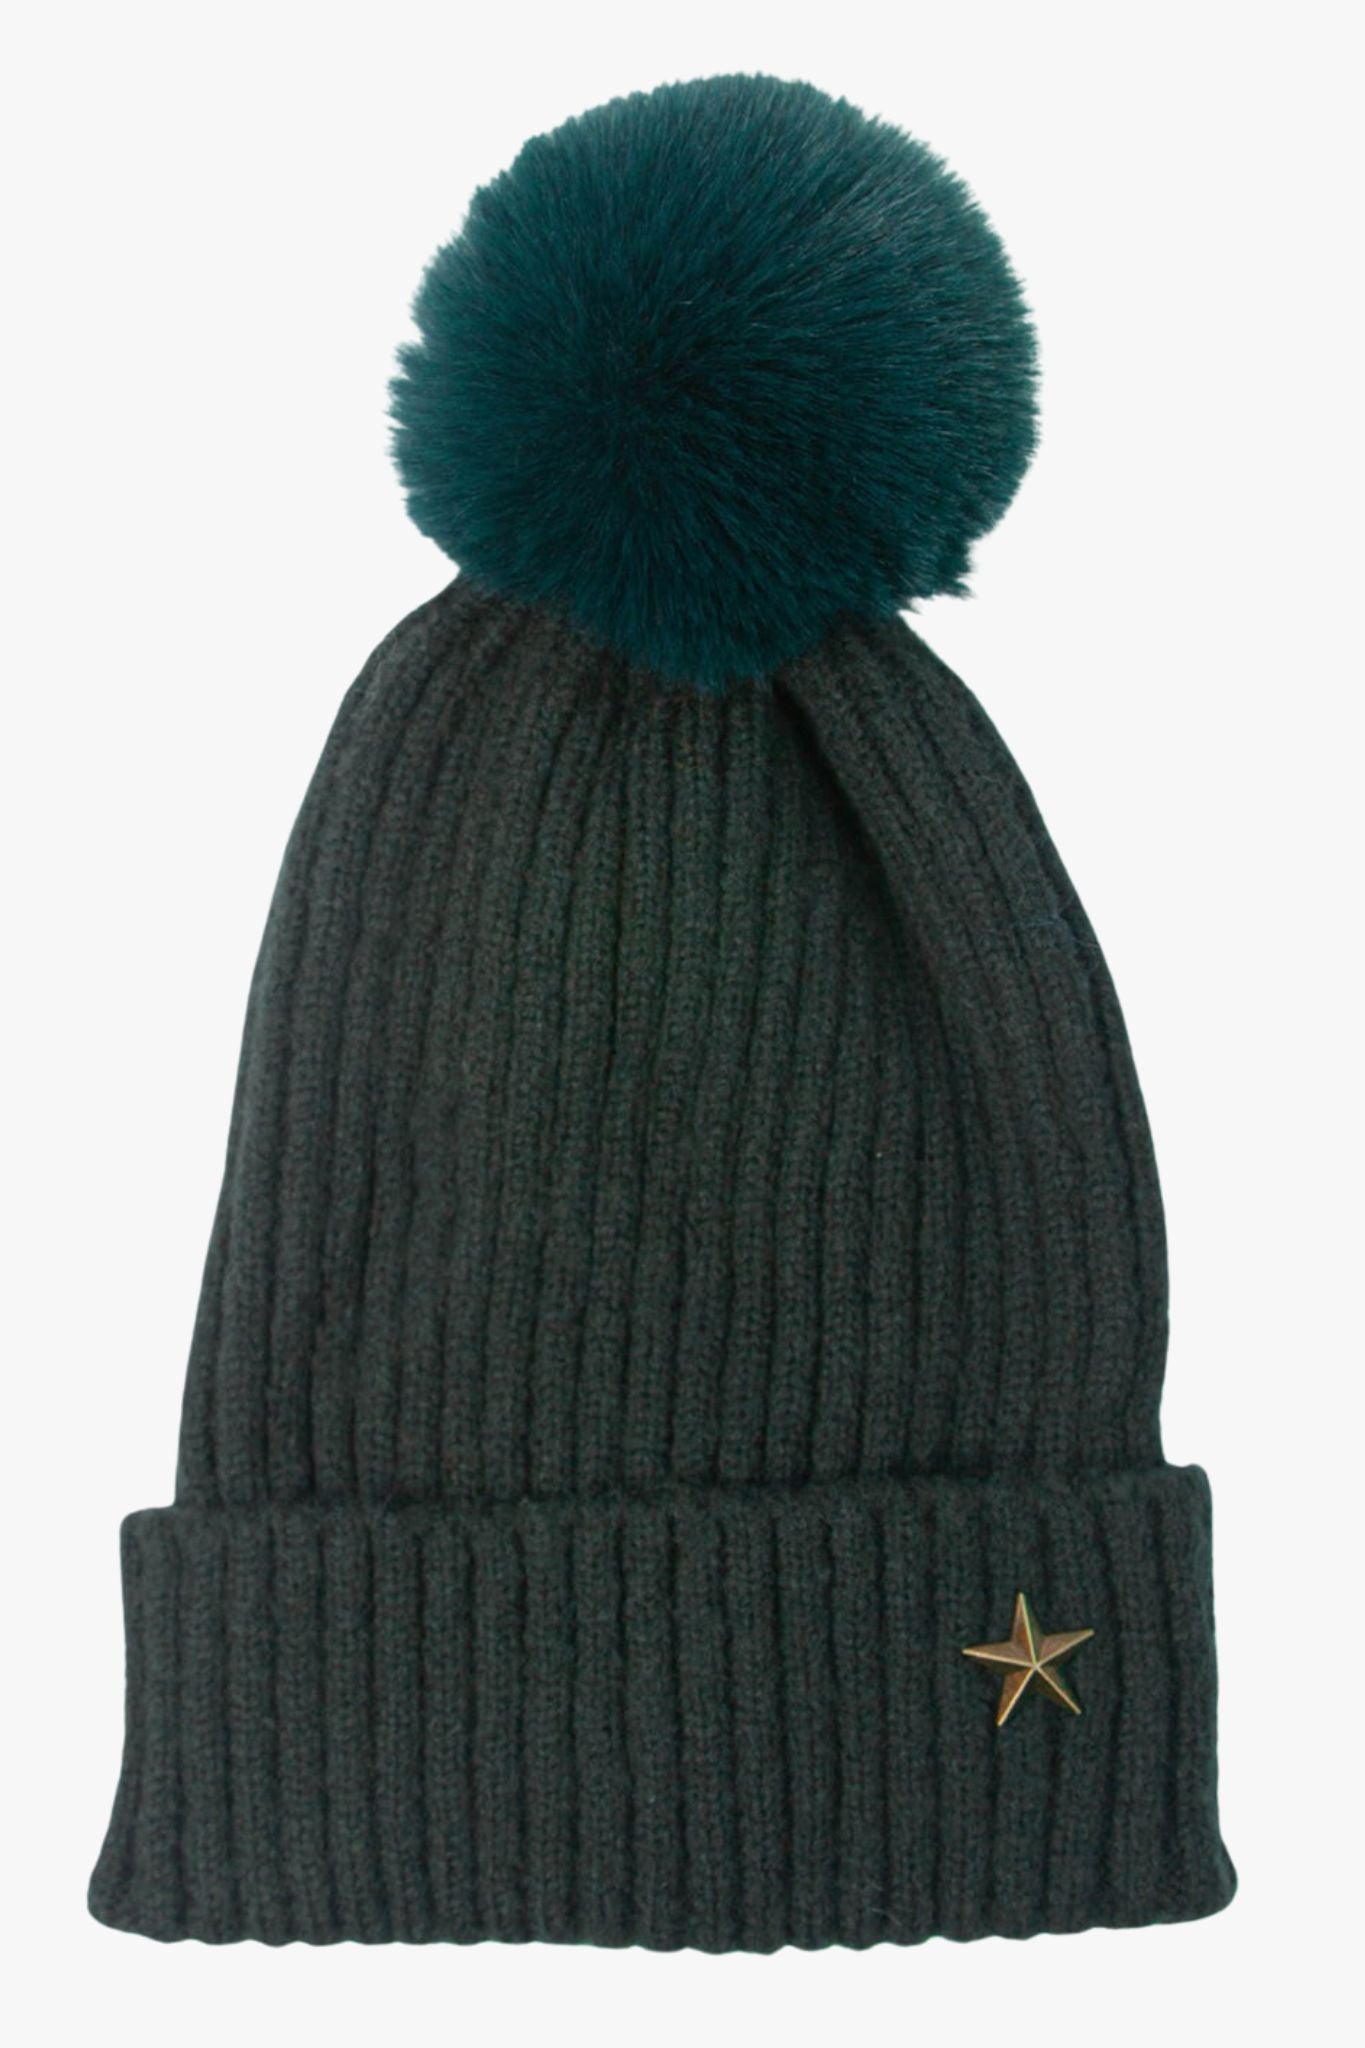 green winter pom pom hat with a metal gold star motif on the rim